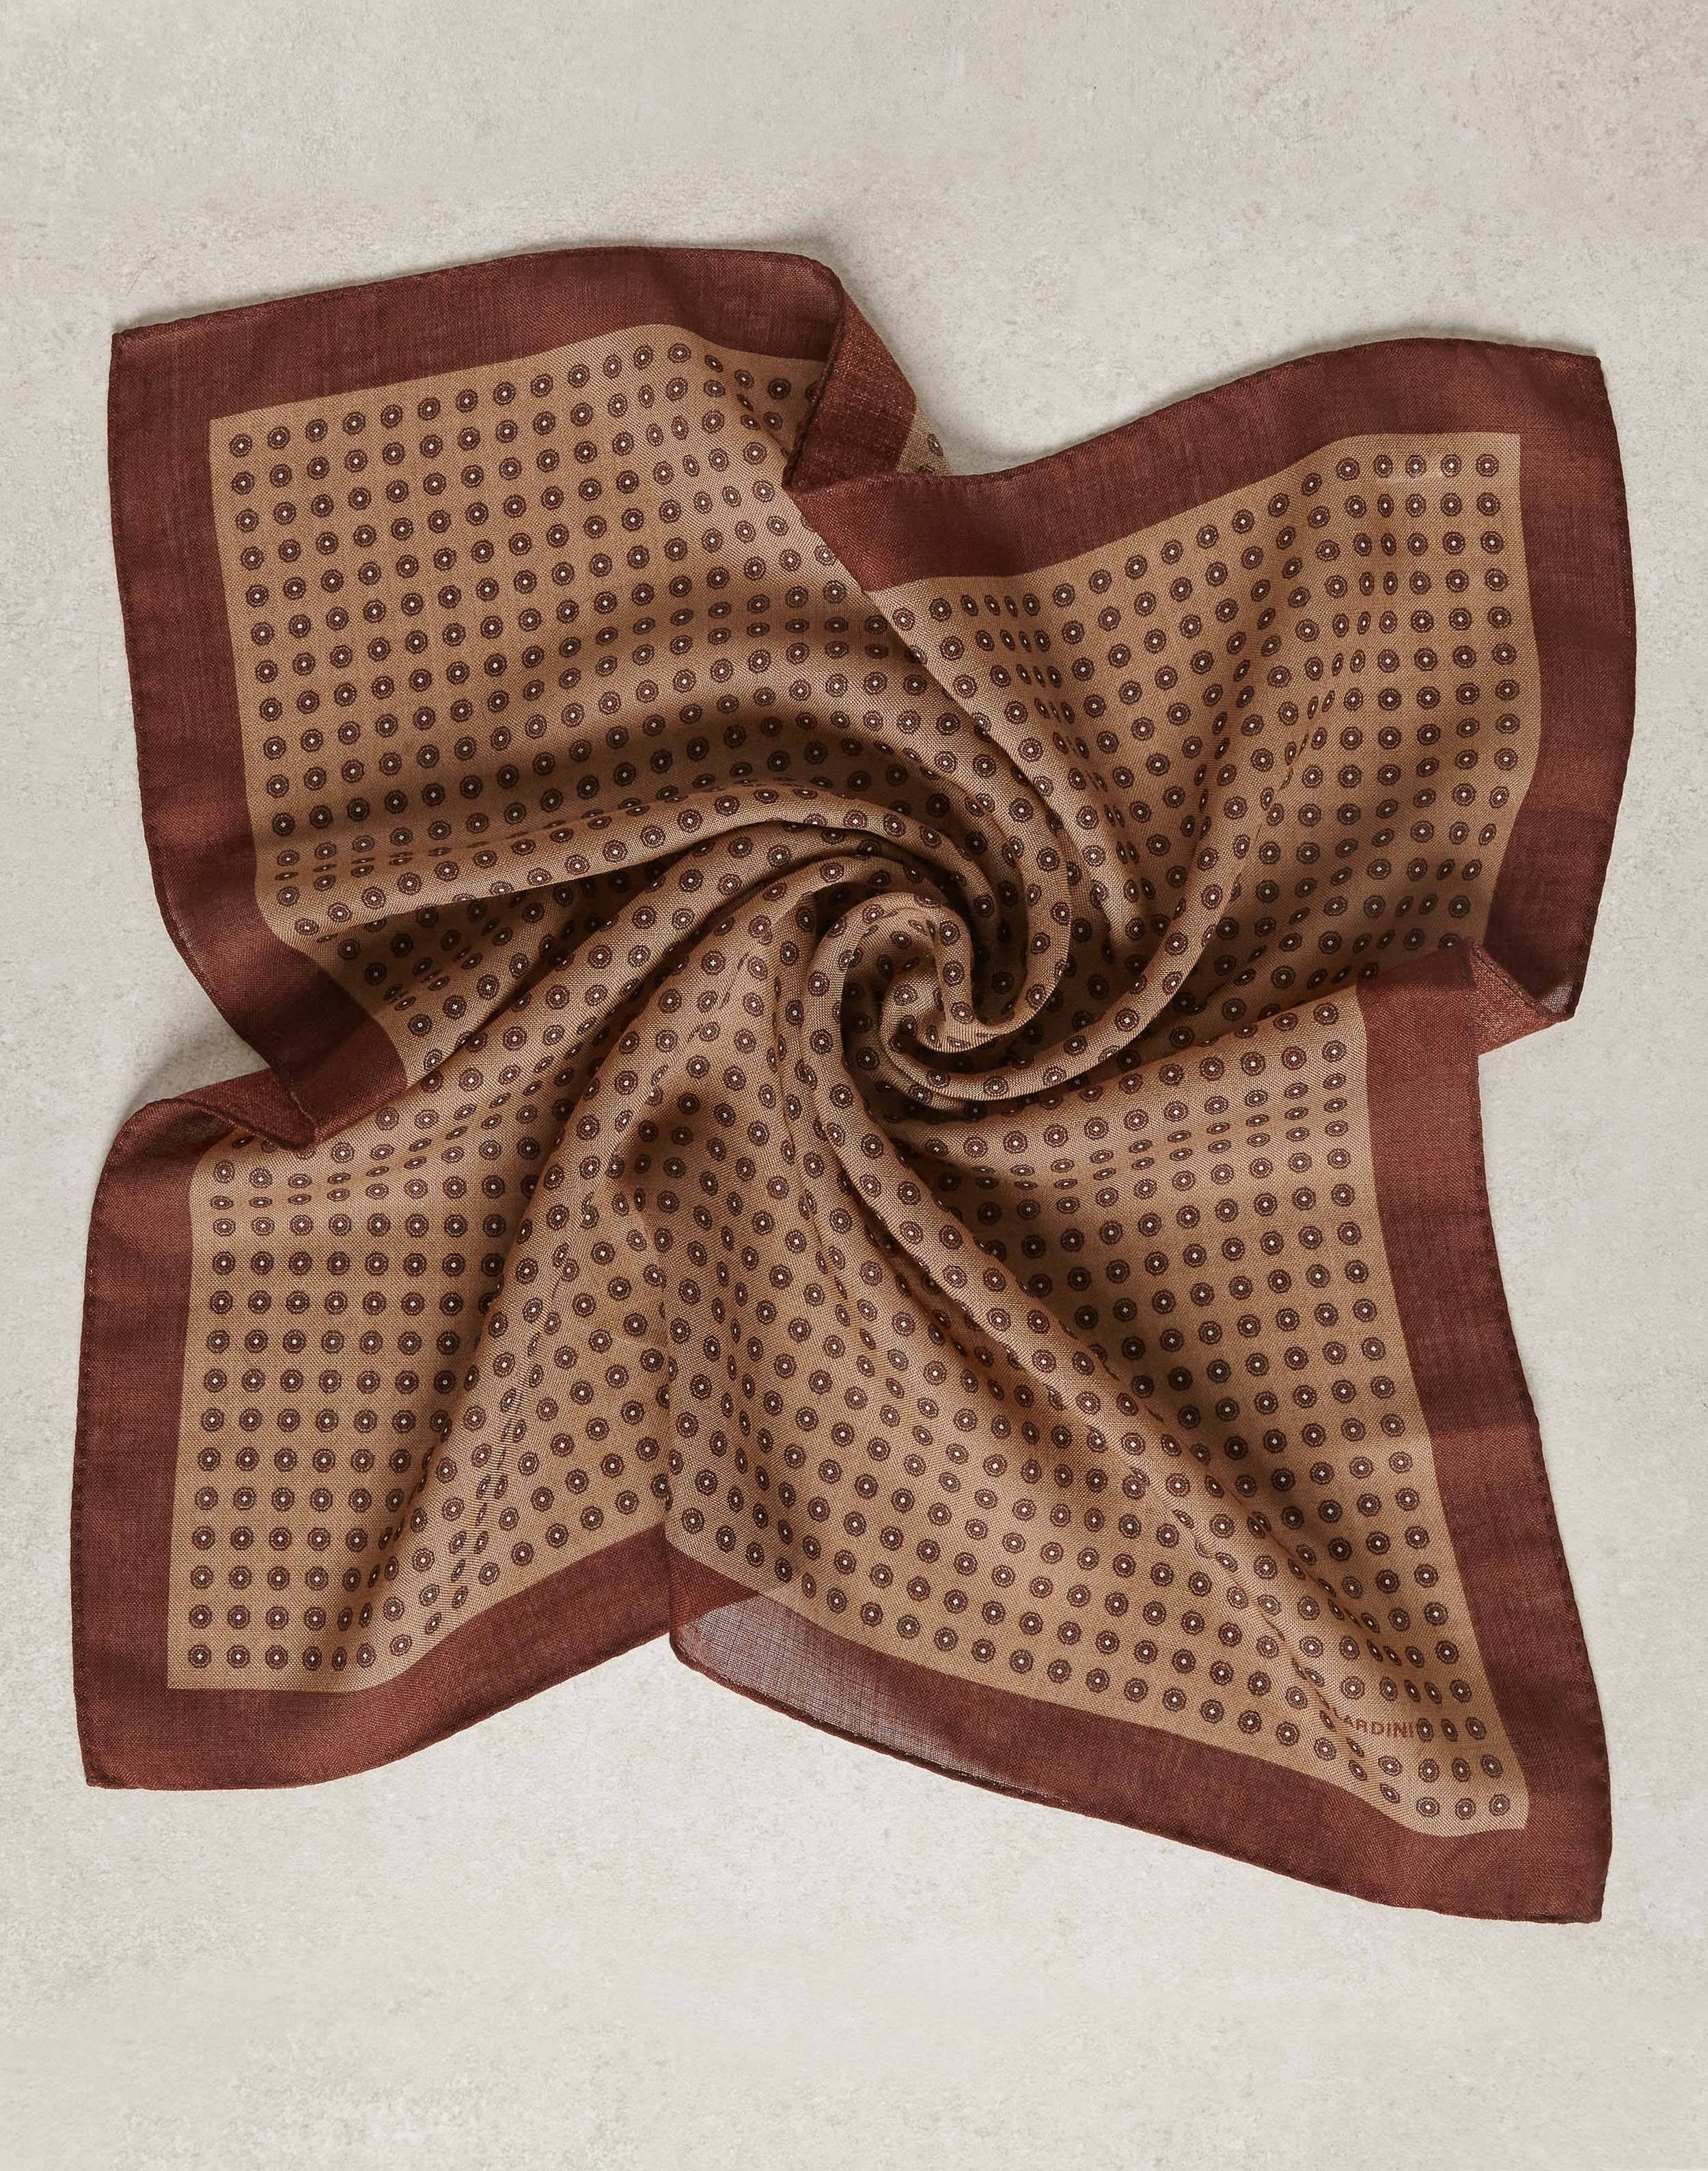 Beige-and-brown scarf with geometric patterning